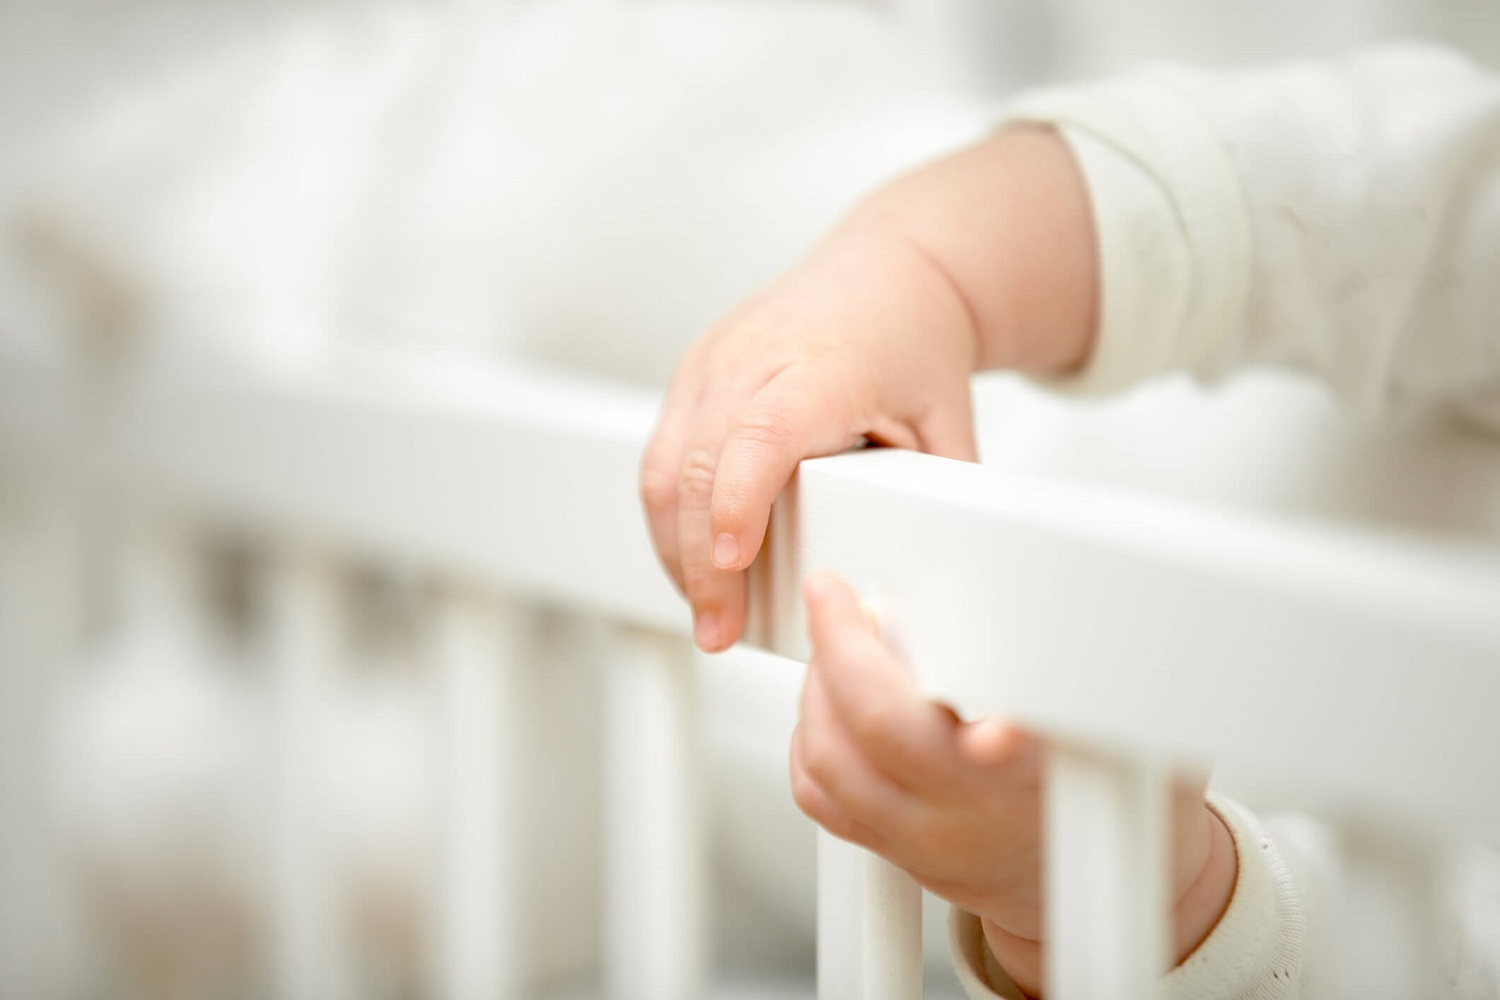 Is Your Baby’s Crib Exposing Them to Toxins? Here’s What You Need to Know